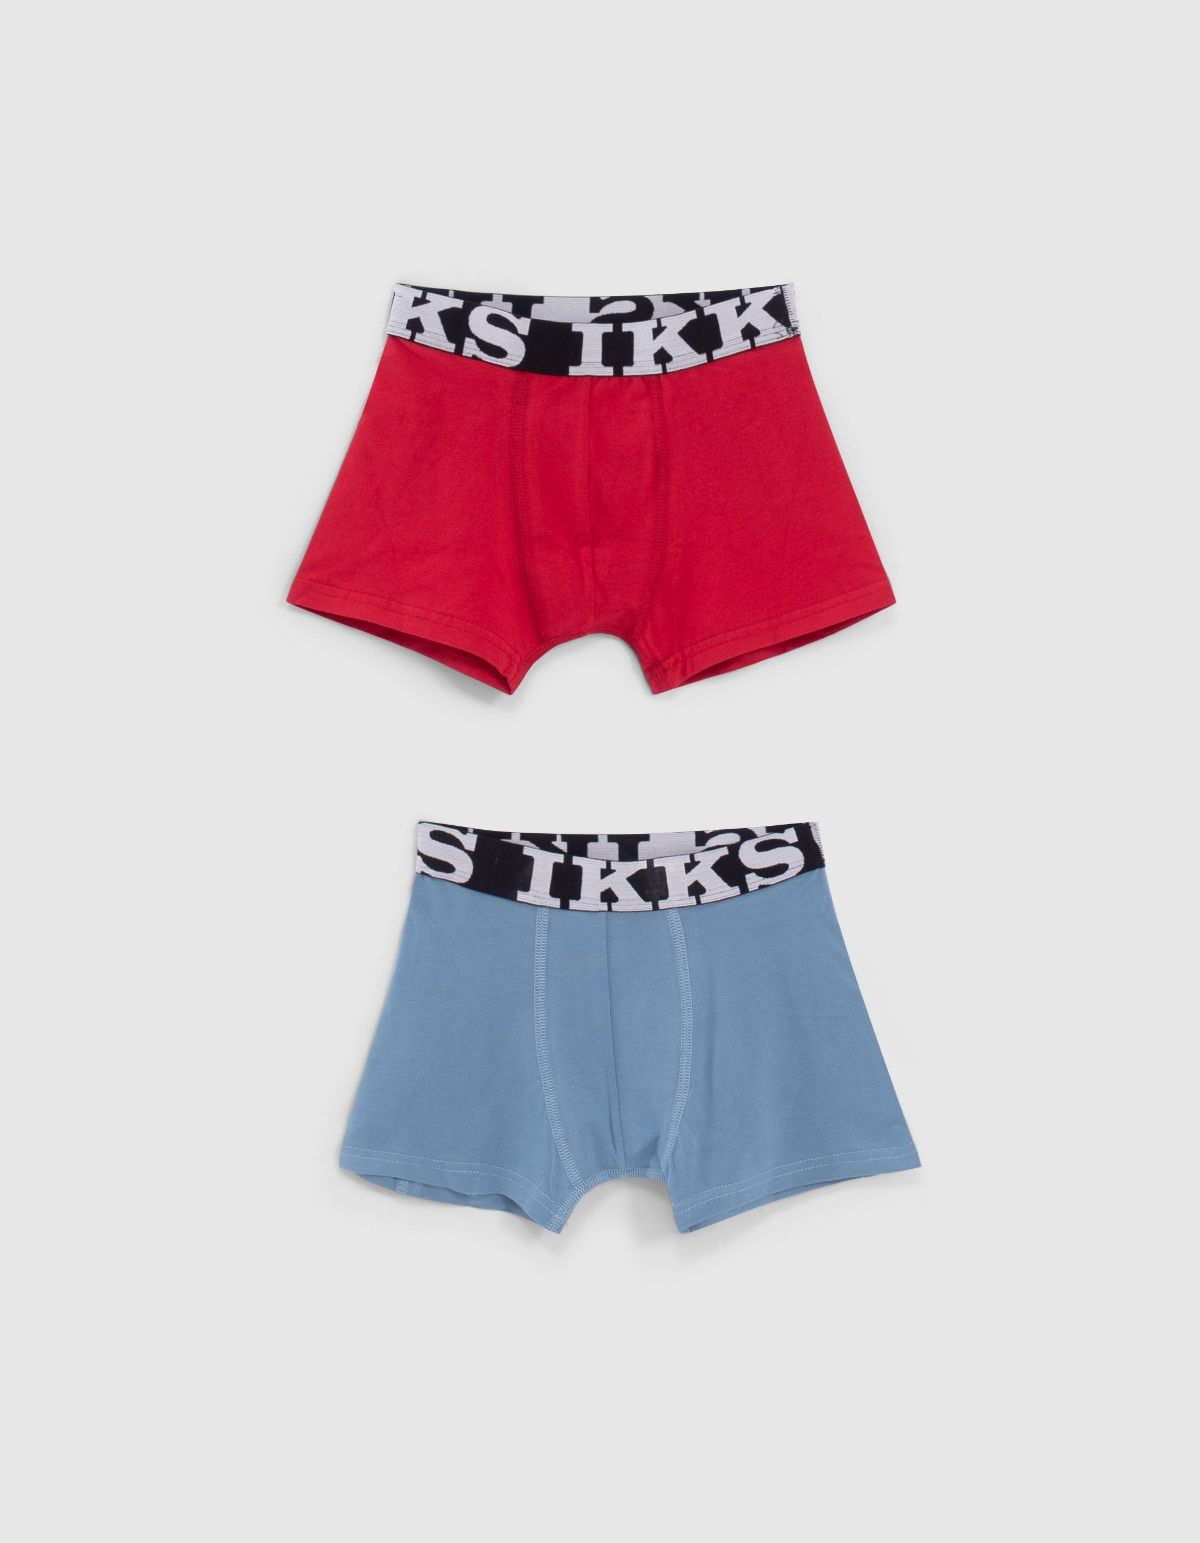 Boys’ medium red and blue boxers